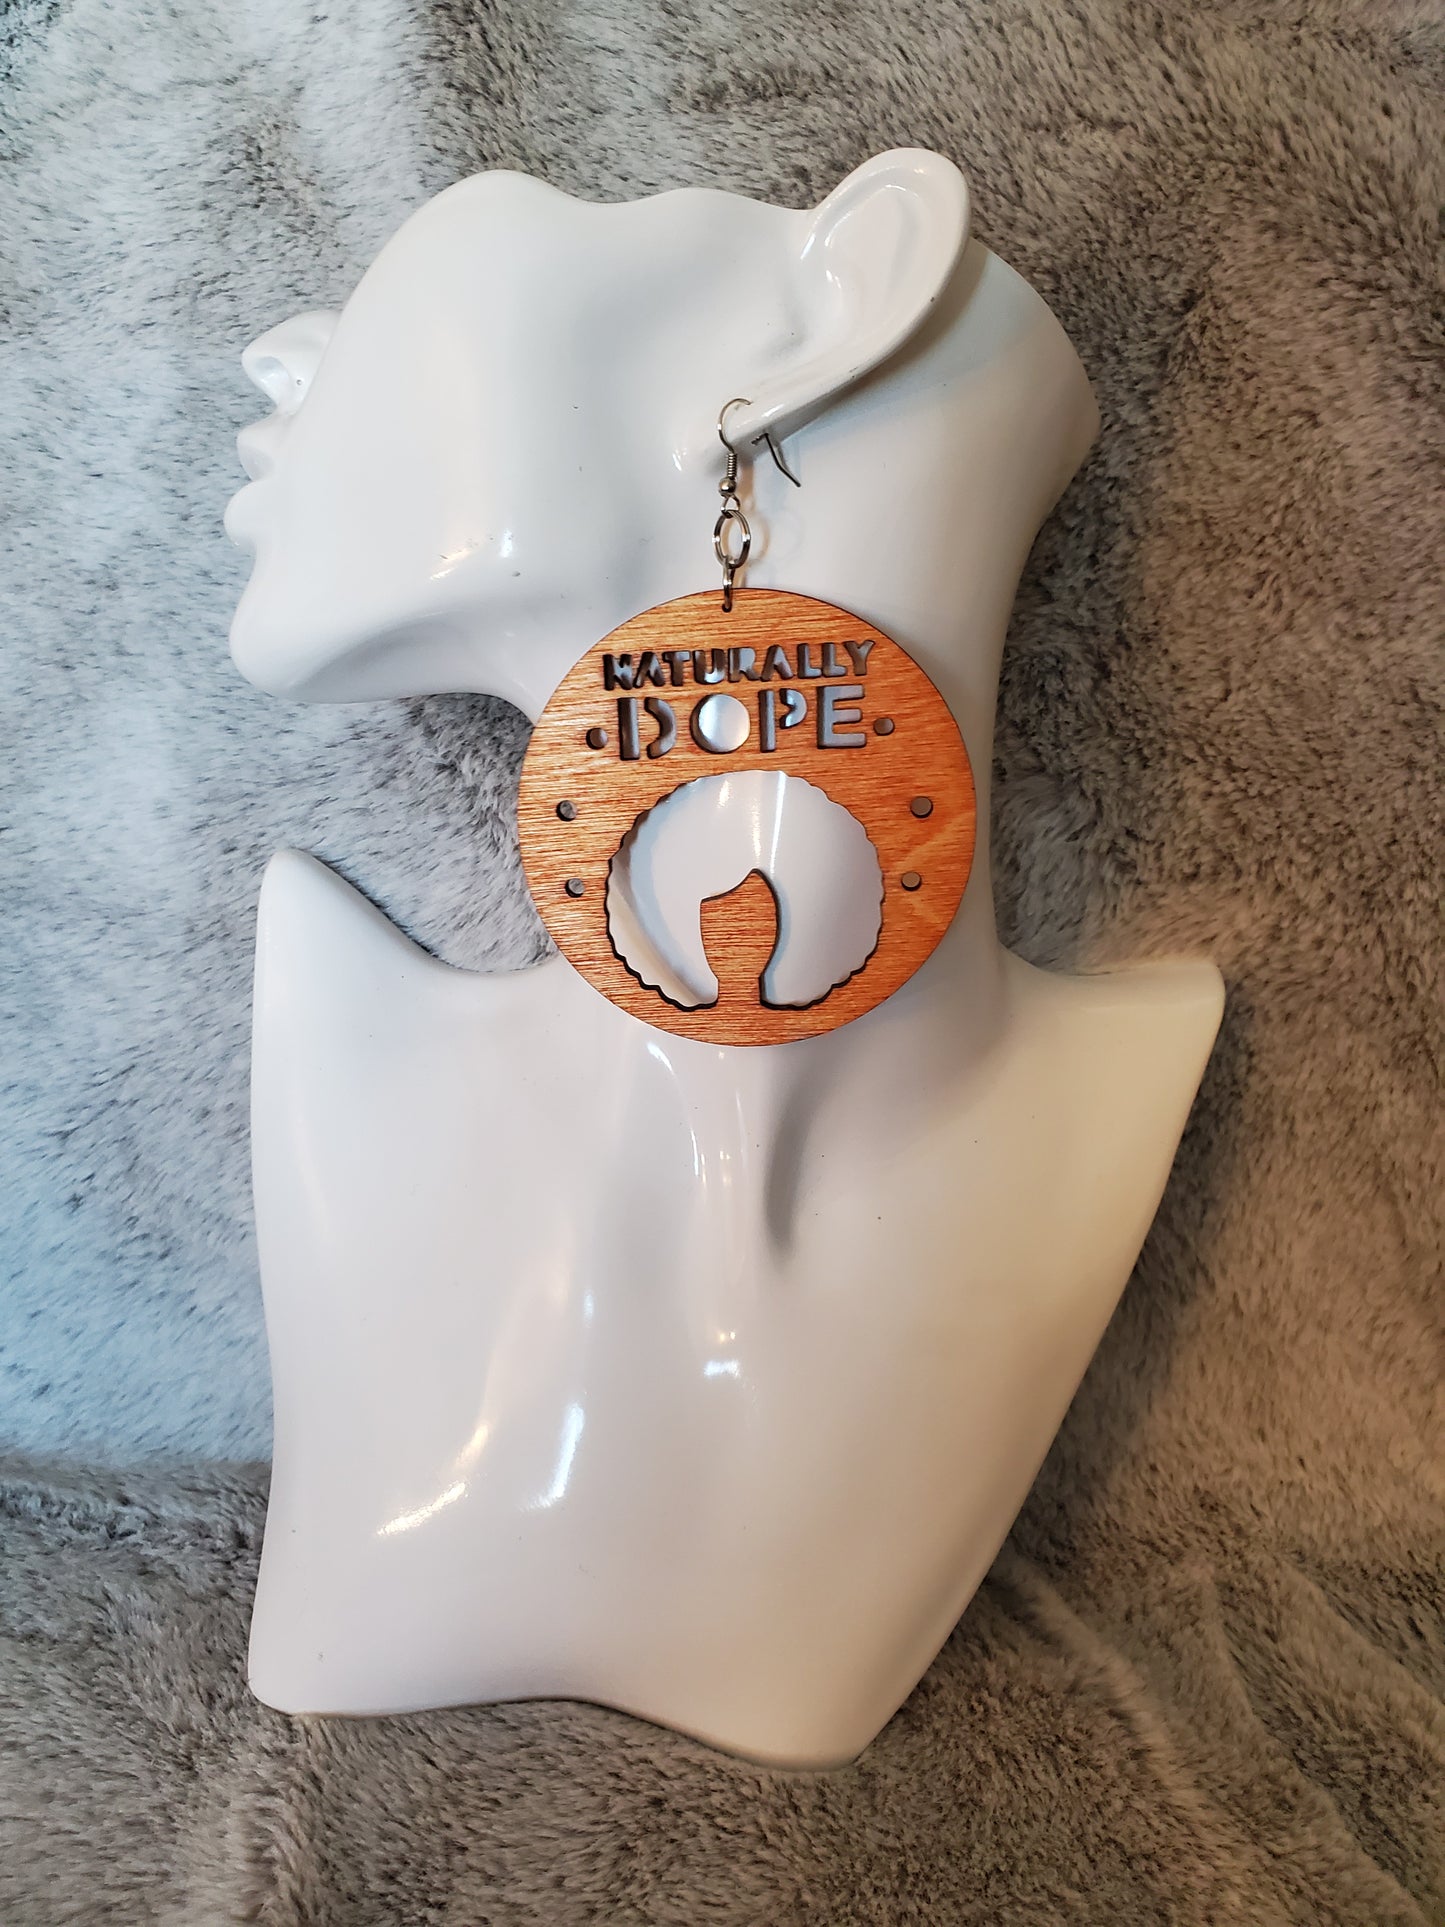 Naturally Dope Earrings (Click for additional styles)